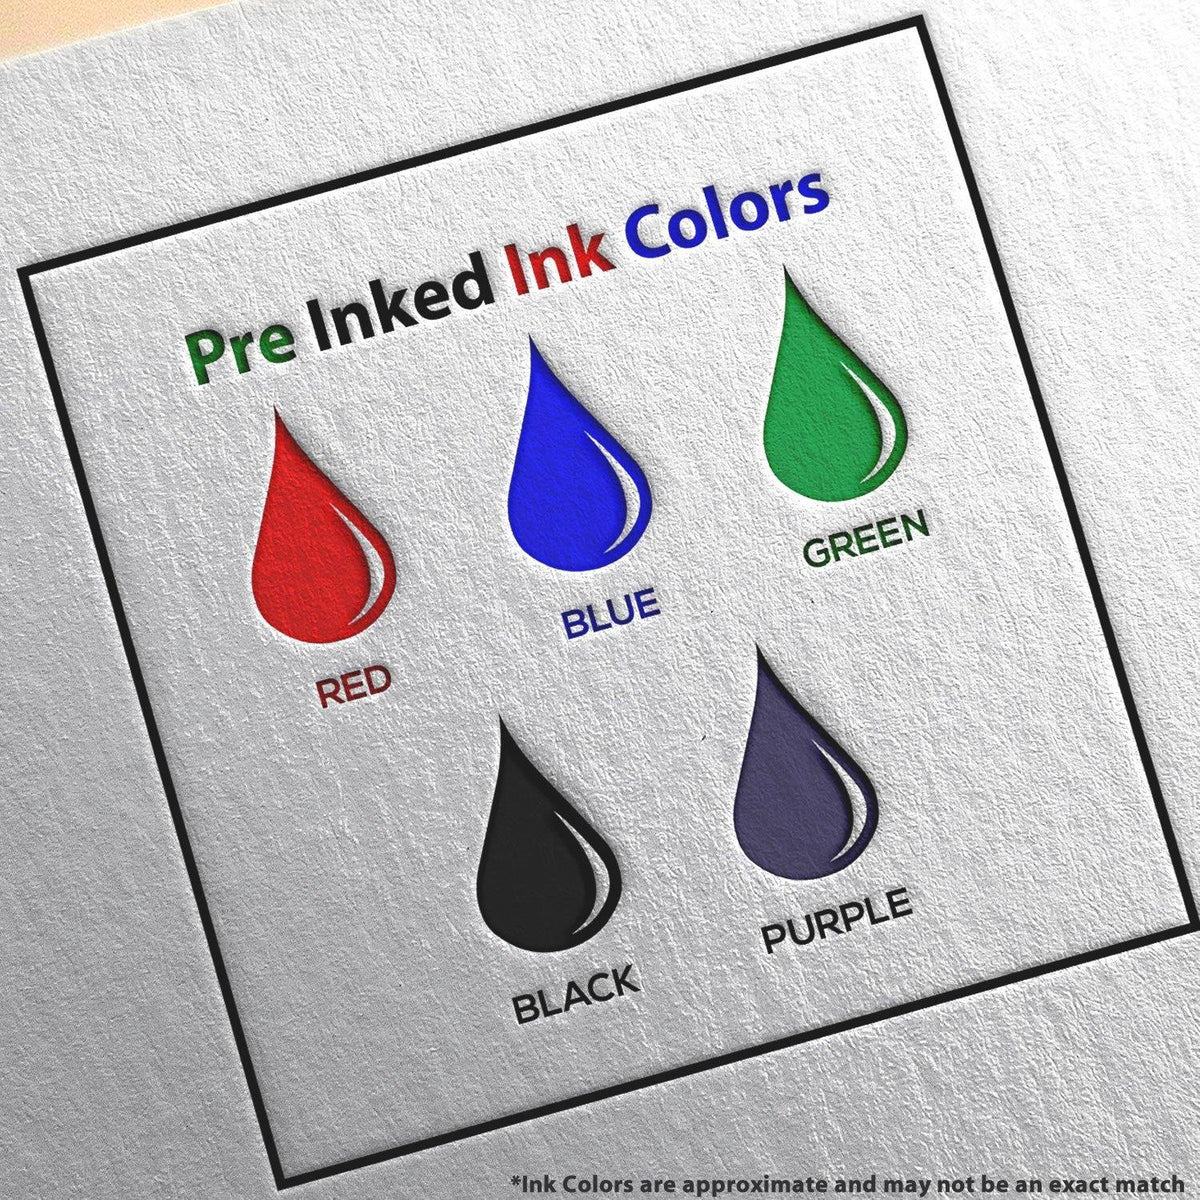 Slim Pre-Inked Emailed with Mailbox Stamp Ink Color Options